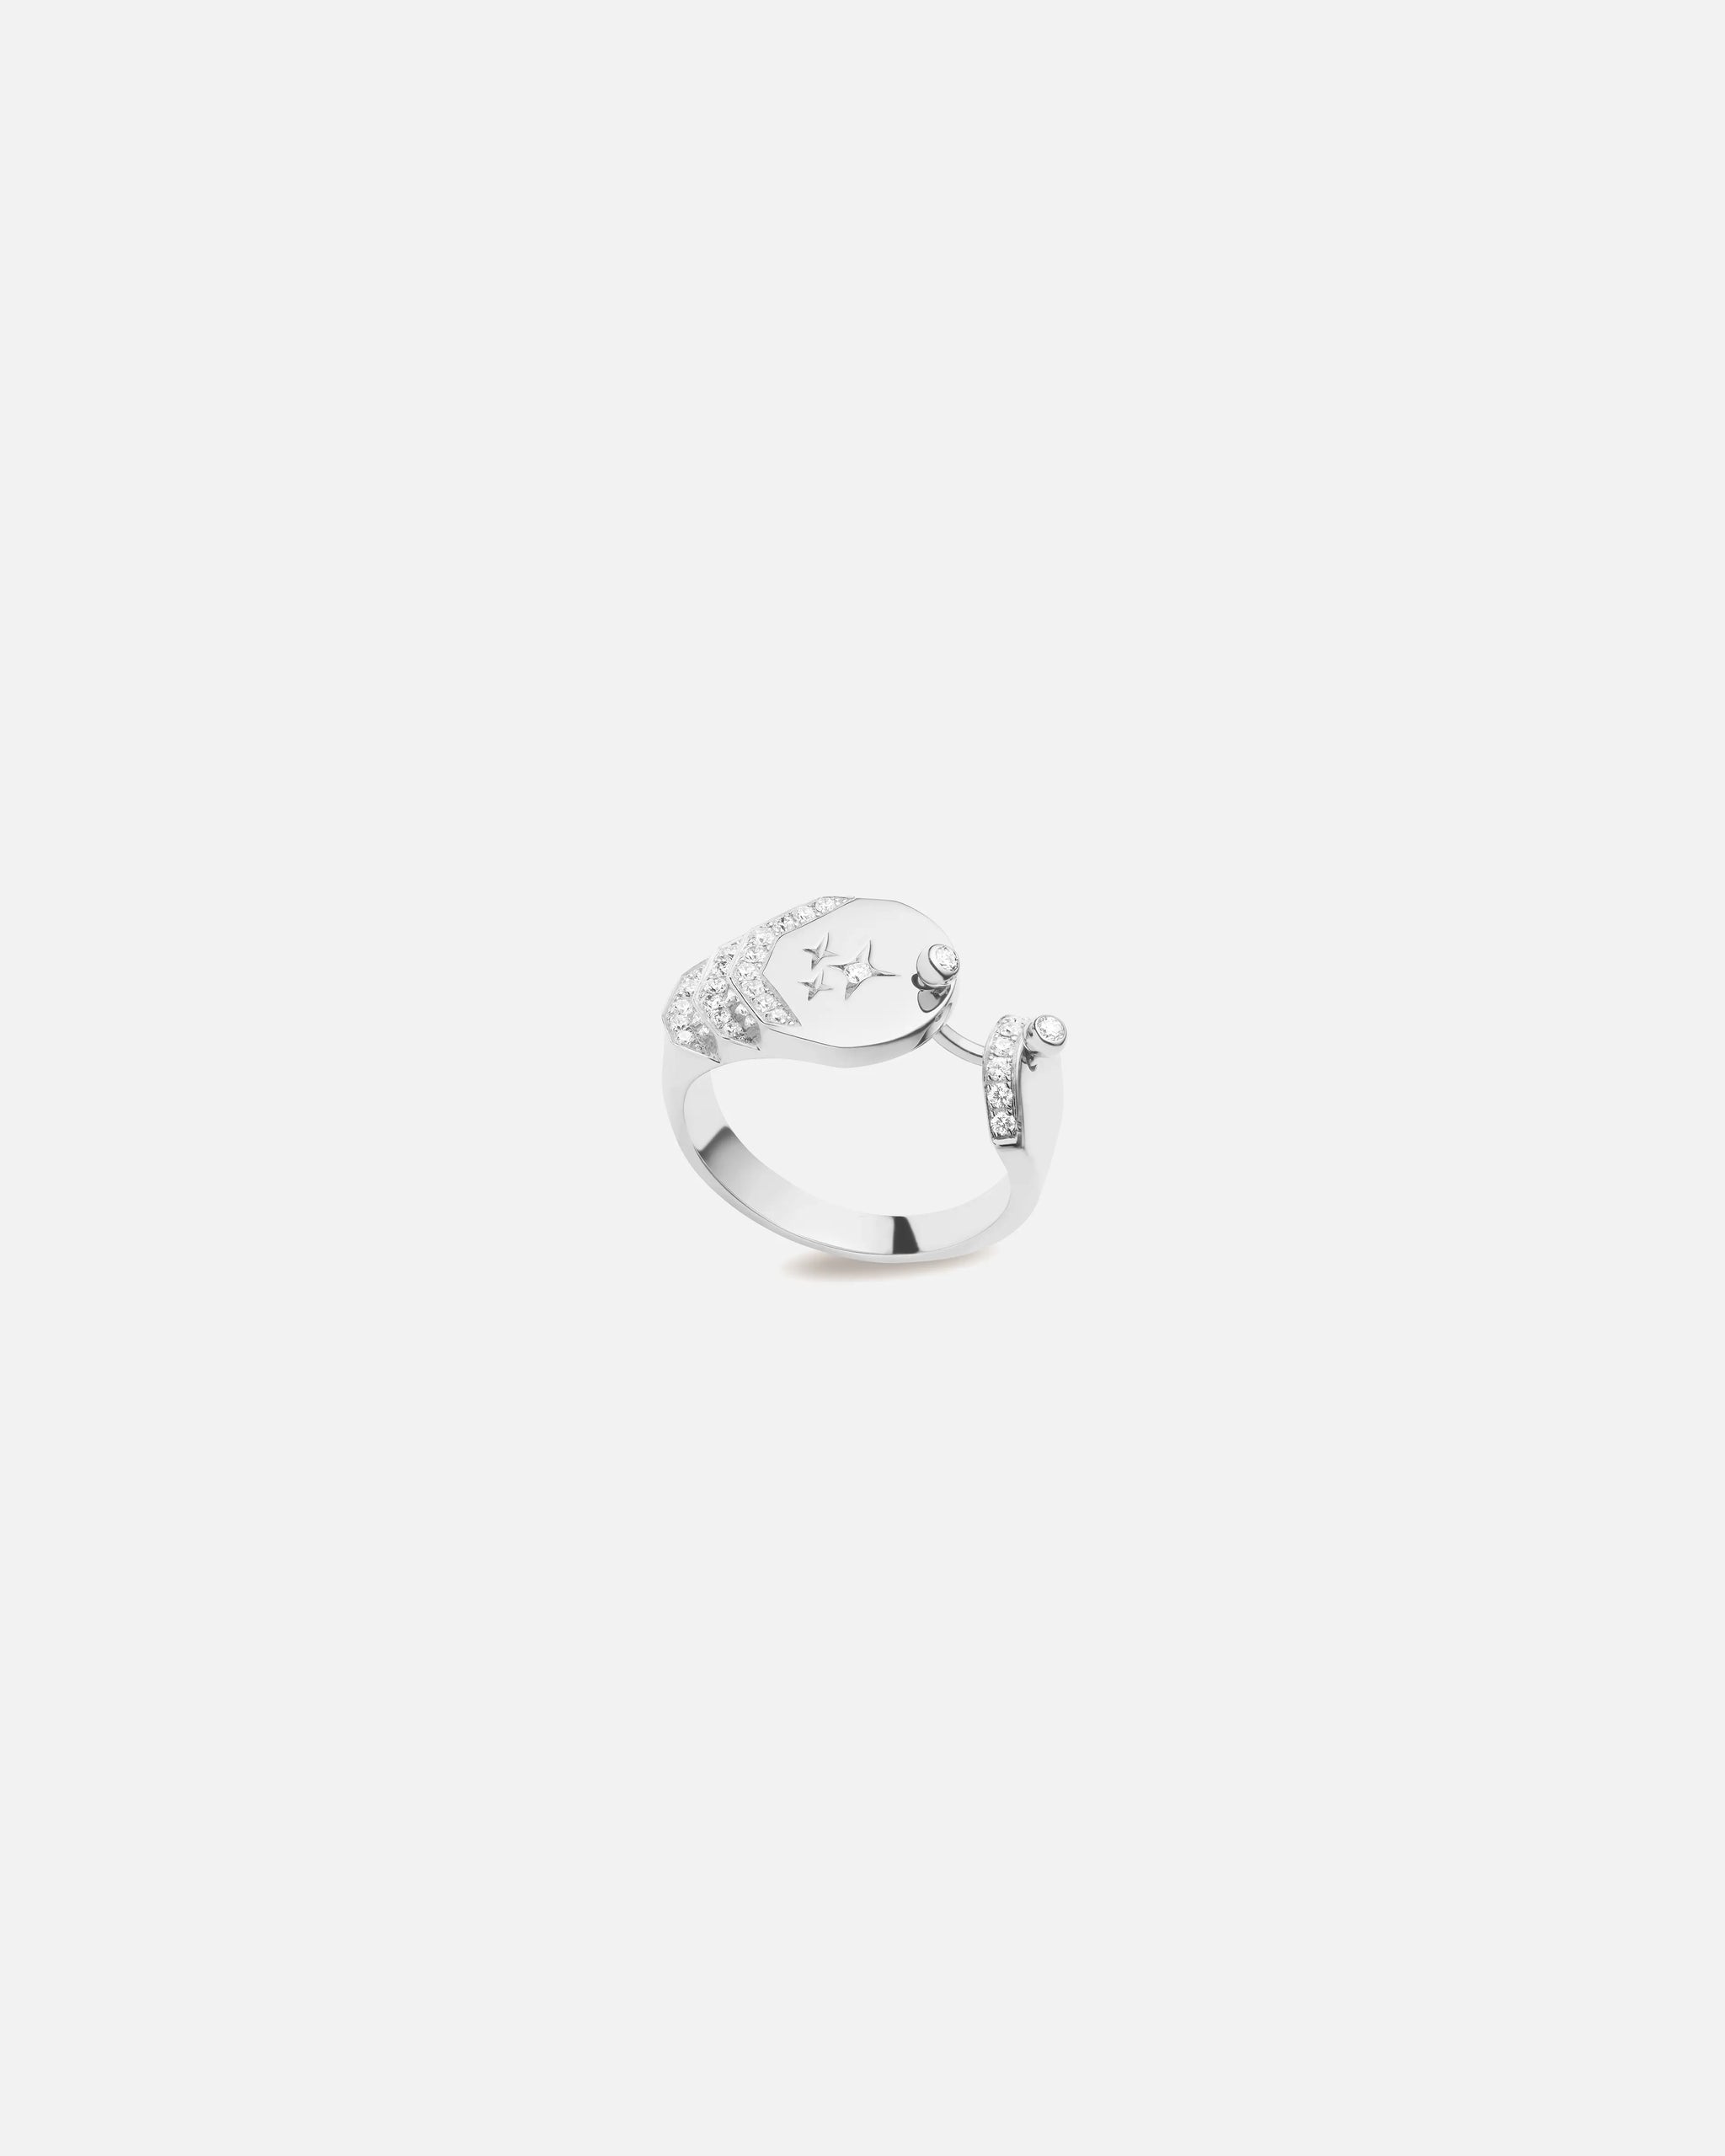 Diamond Mood Sparkles Ring in White Gold - Nouvel Heritage - Nouvel Heritage